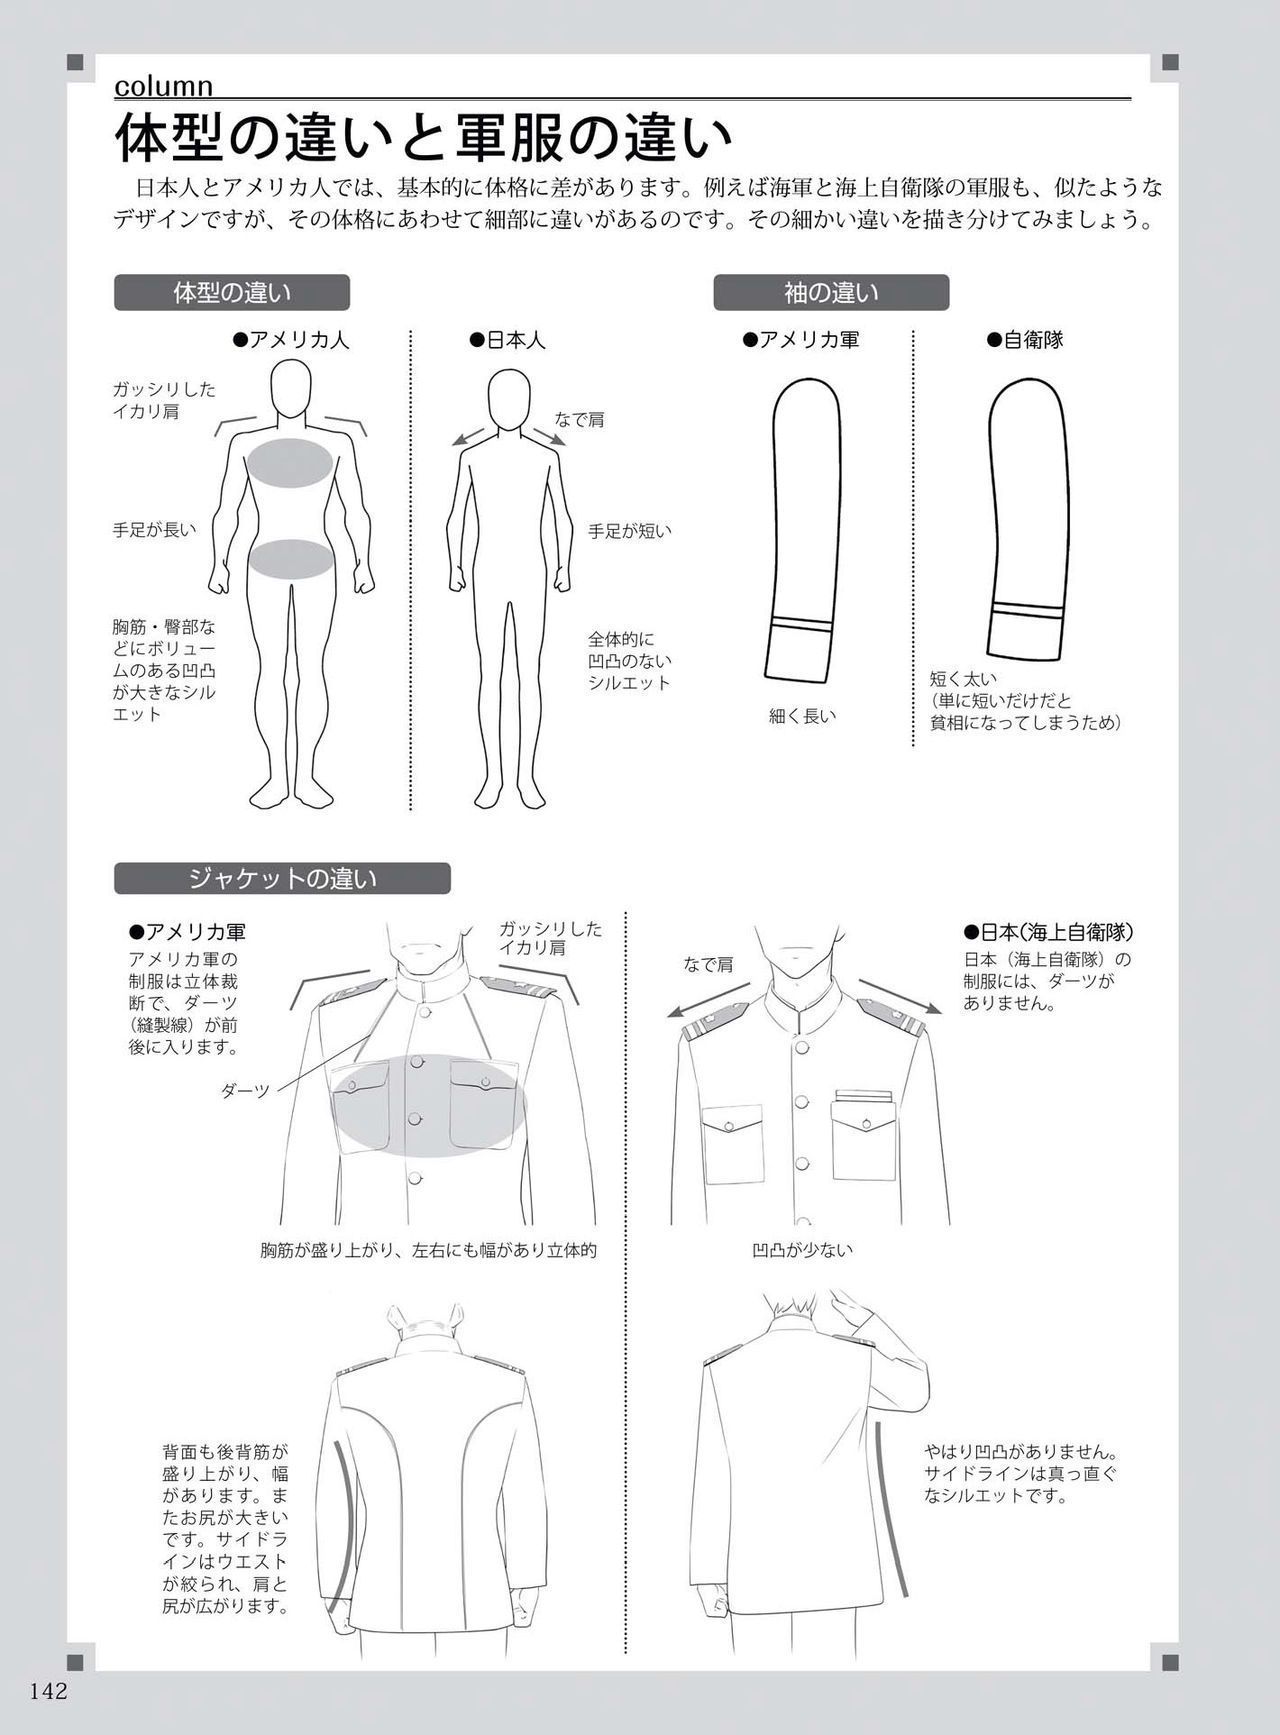 How to draw military uniforms and uniforms From Self-Defense Forces 軍服・制服の描き方 アメリカ軍・自衛隊の制服から戦闘服まで 145